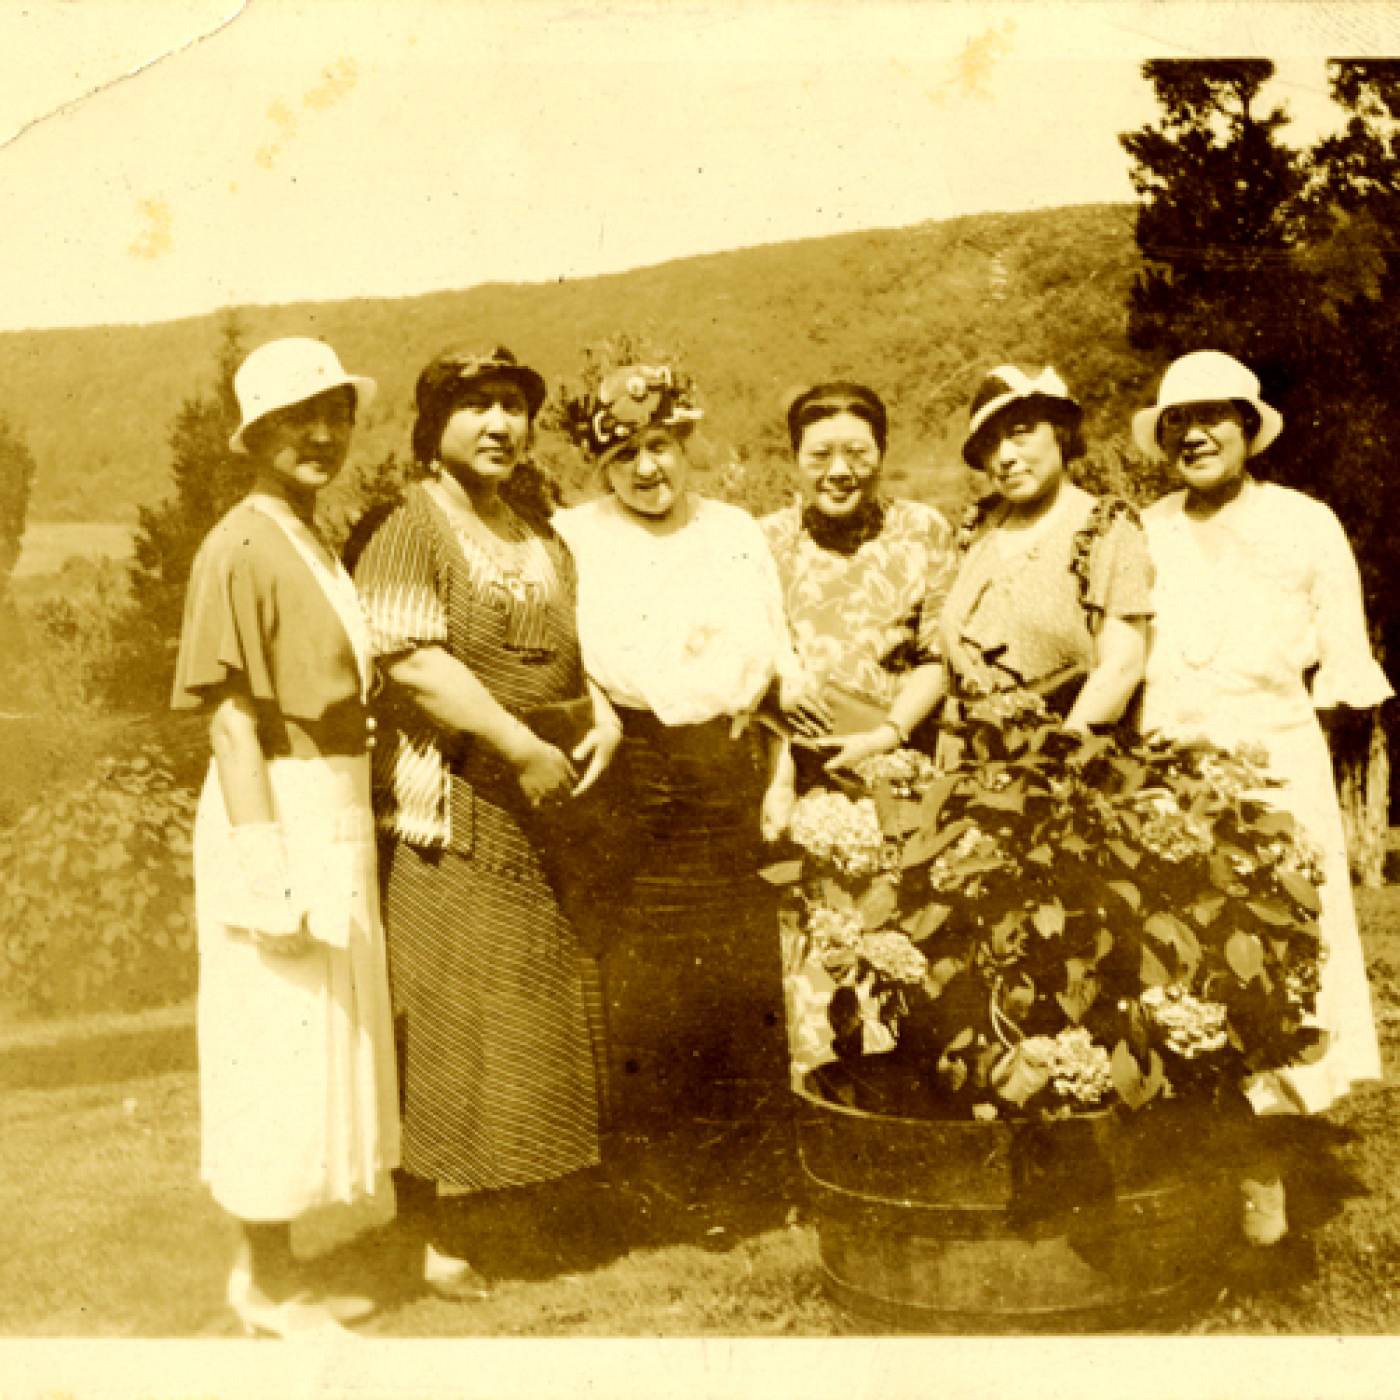 2015.037.199 Grace Typond, Douglas Chu's great-grandmother, is on the right. The other women are unidentified. Date unknown. Courtesy of Douglas J. Chu, Museum of Chinese in America (MOCA) Collection.